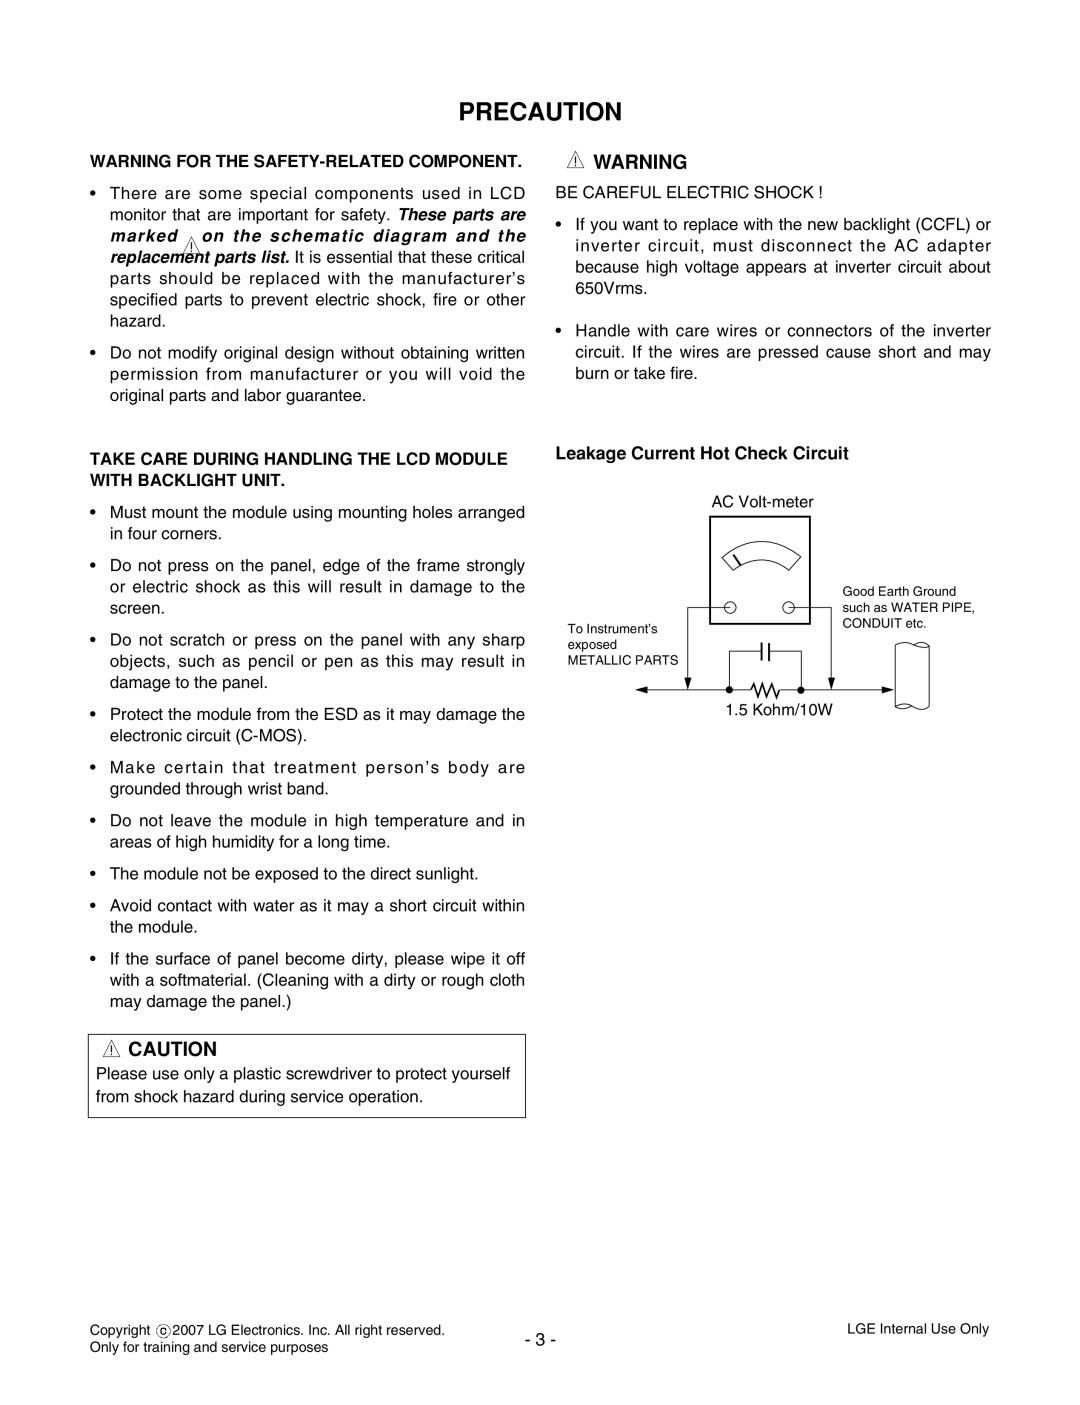 LG Electronics L1733TR Precaution, Warning For The Safety-Relatedcomponent, marked on the schematic diagram and the 